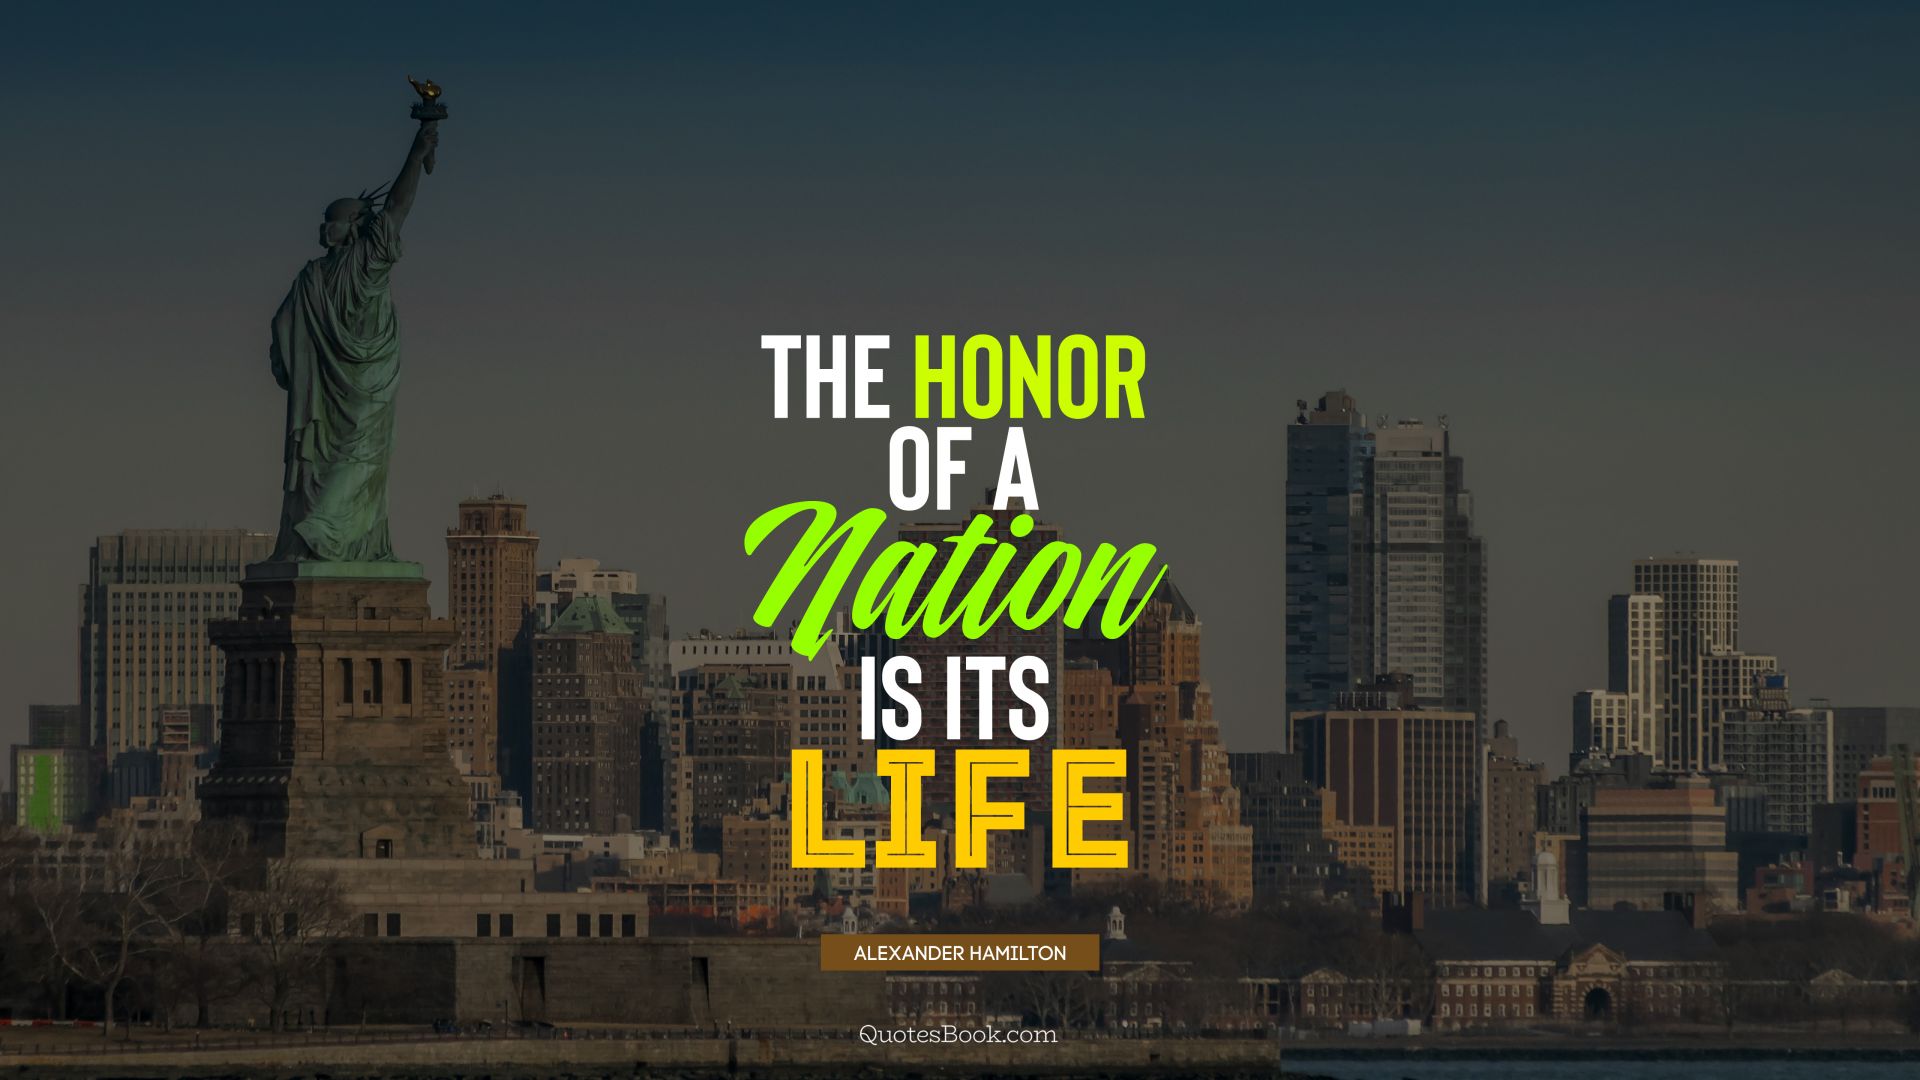 The honor of a nation is its life. - Quote by Alexander Hamilton